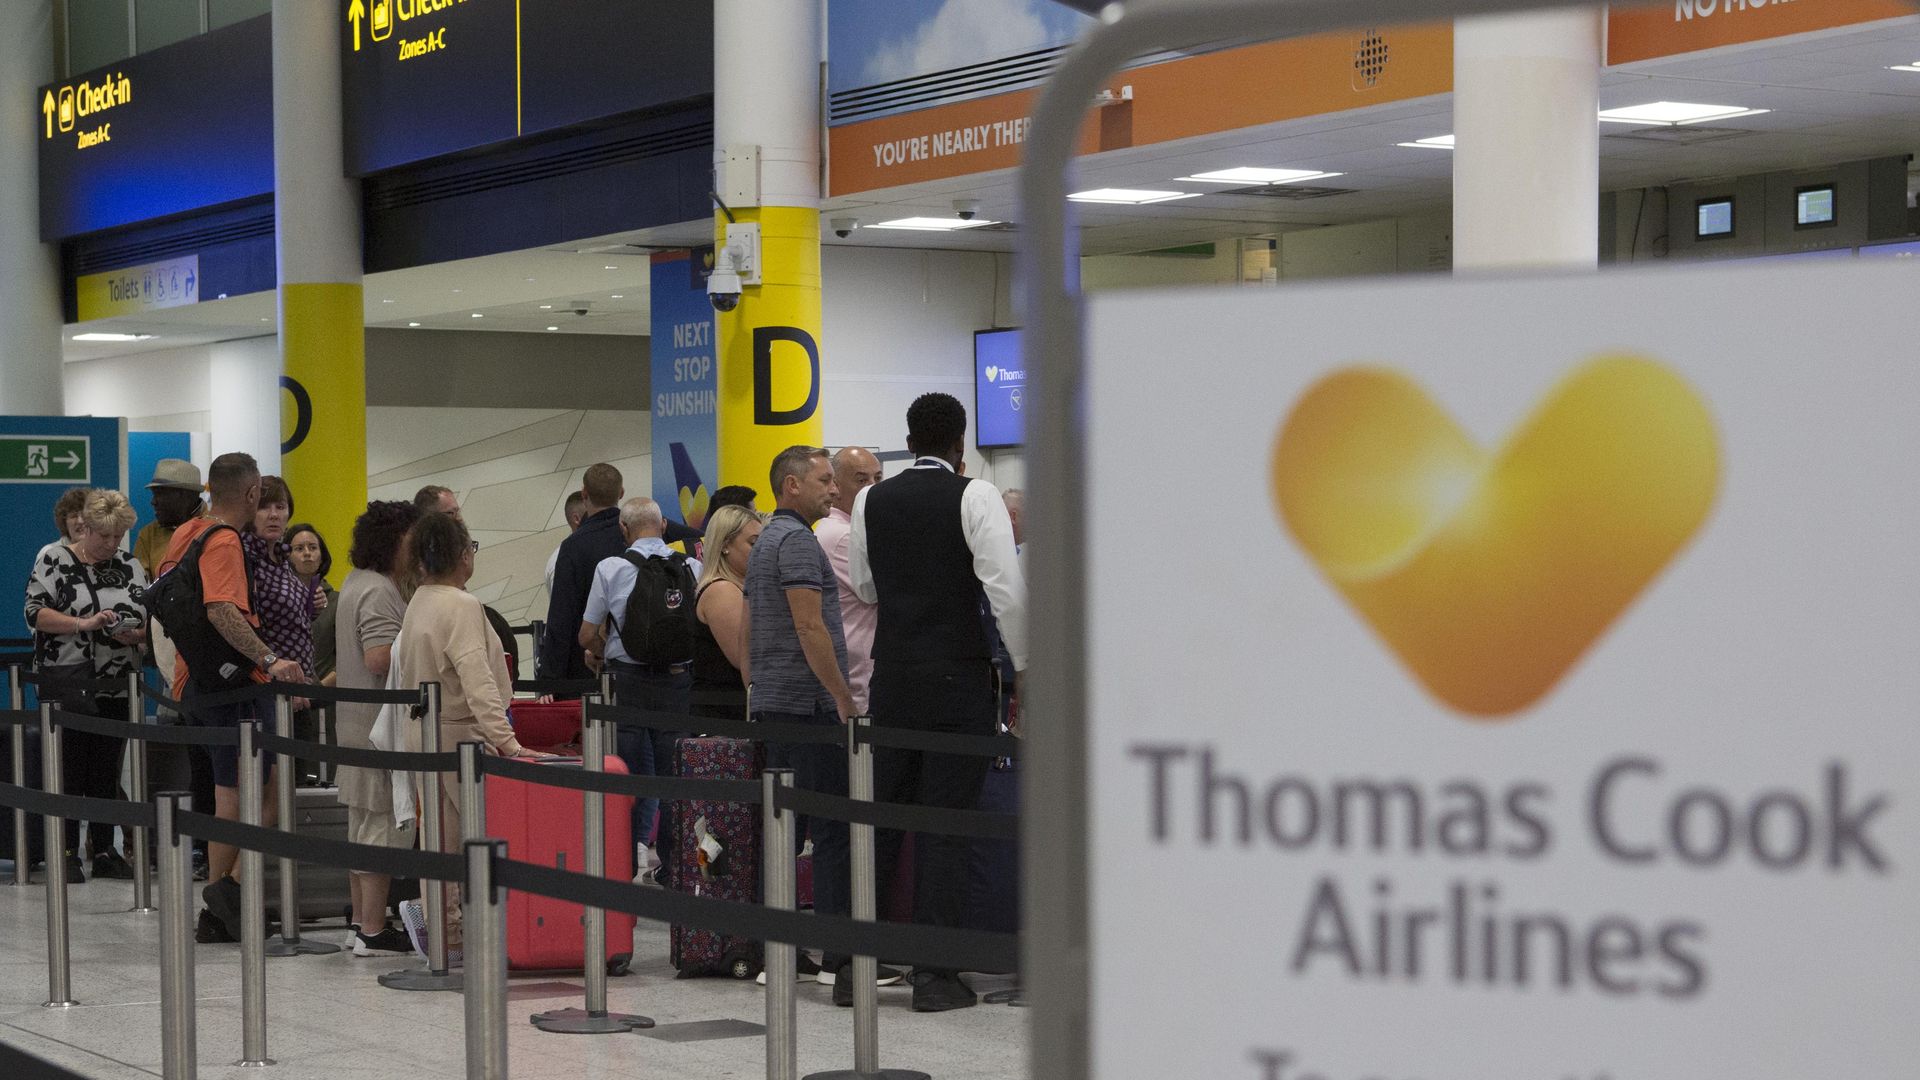 A general view of the Thomas Cook check-in desks in the South Terminal of Gatwick Airport.